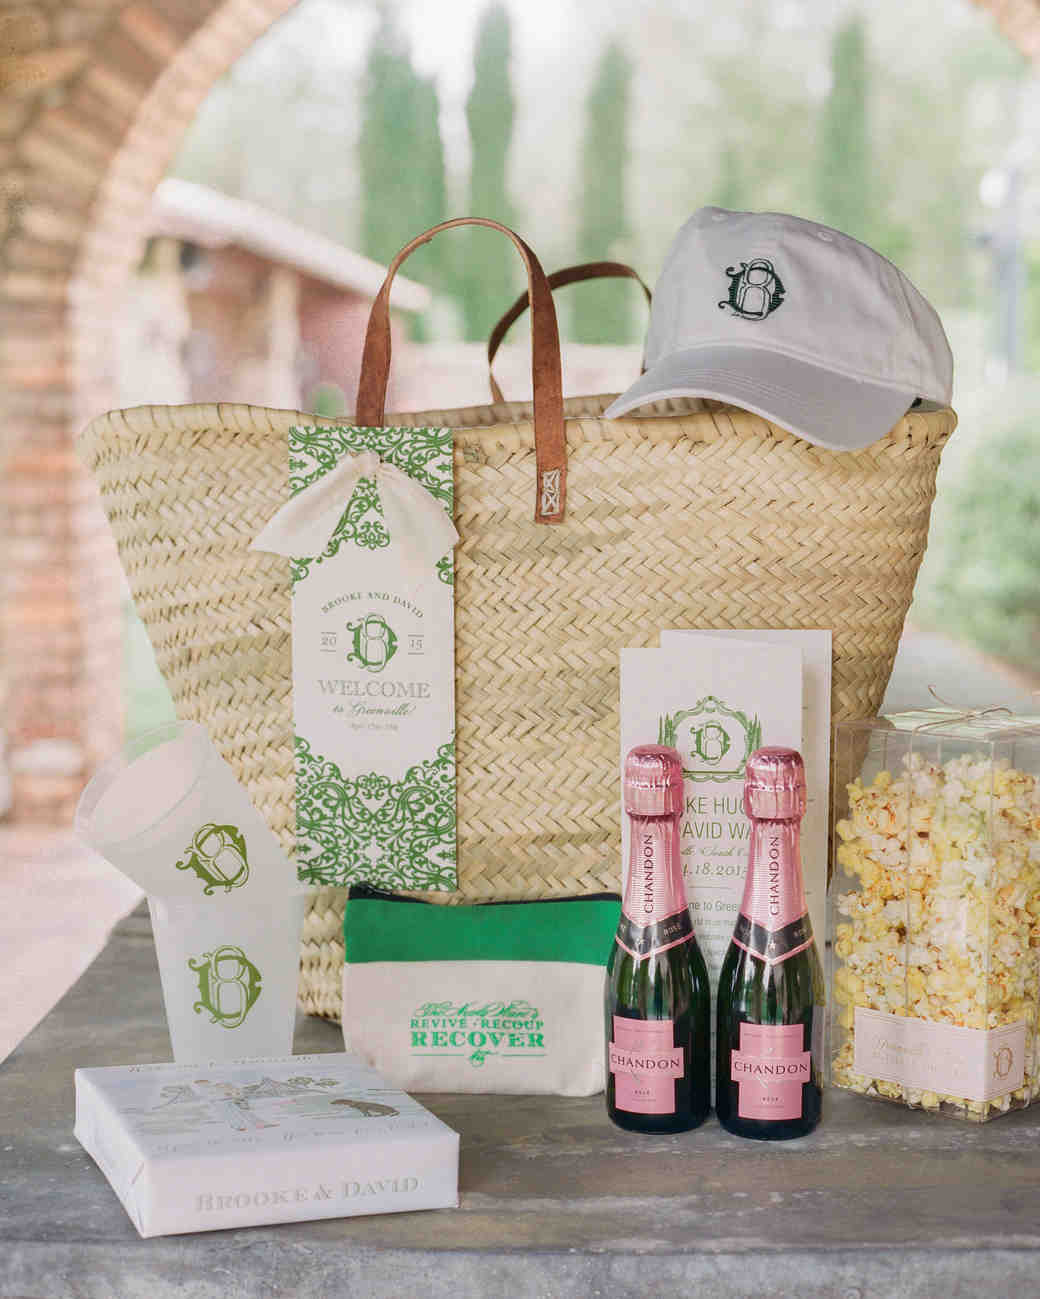 Wedding Guest Gift Bag Ideas
 46 Wel e Bags from Real Weddings